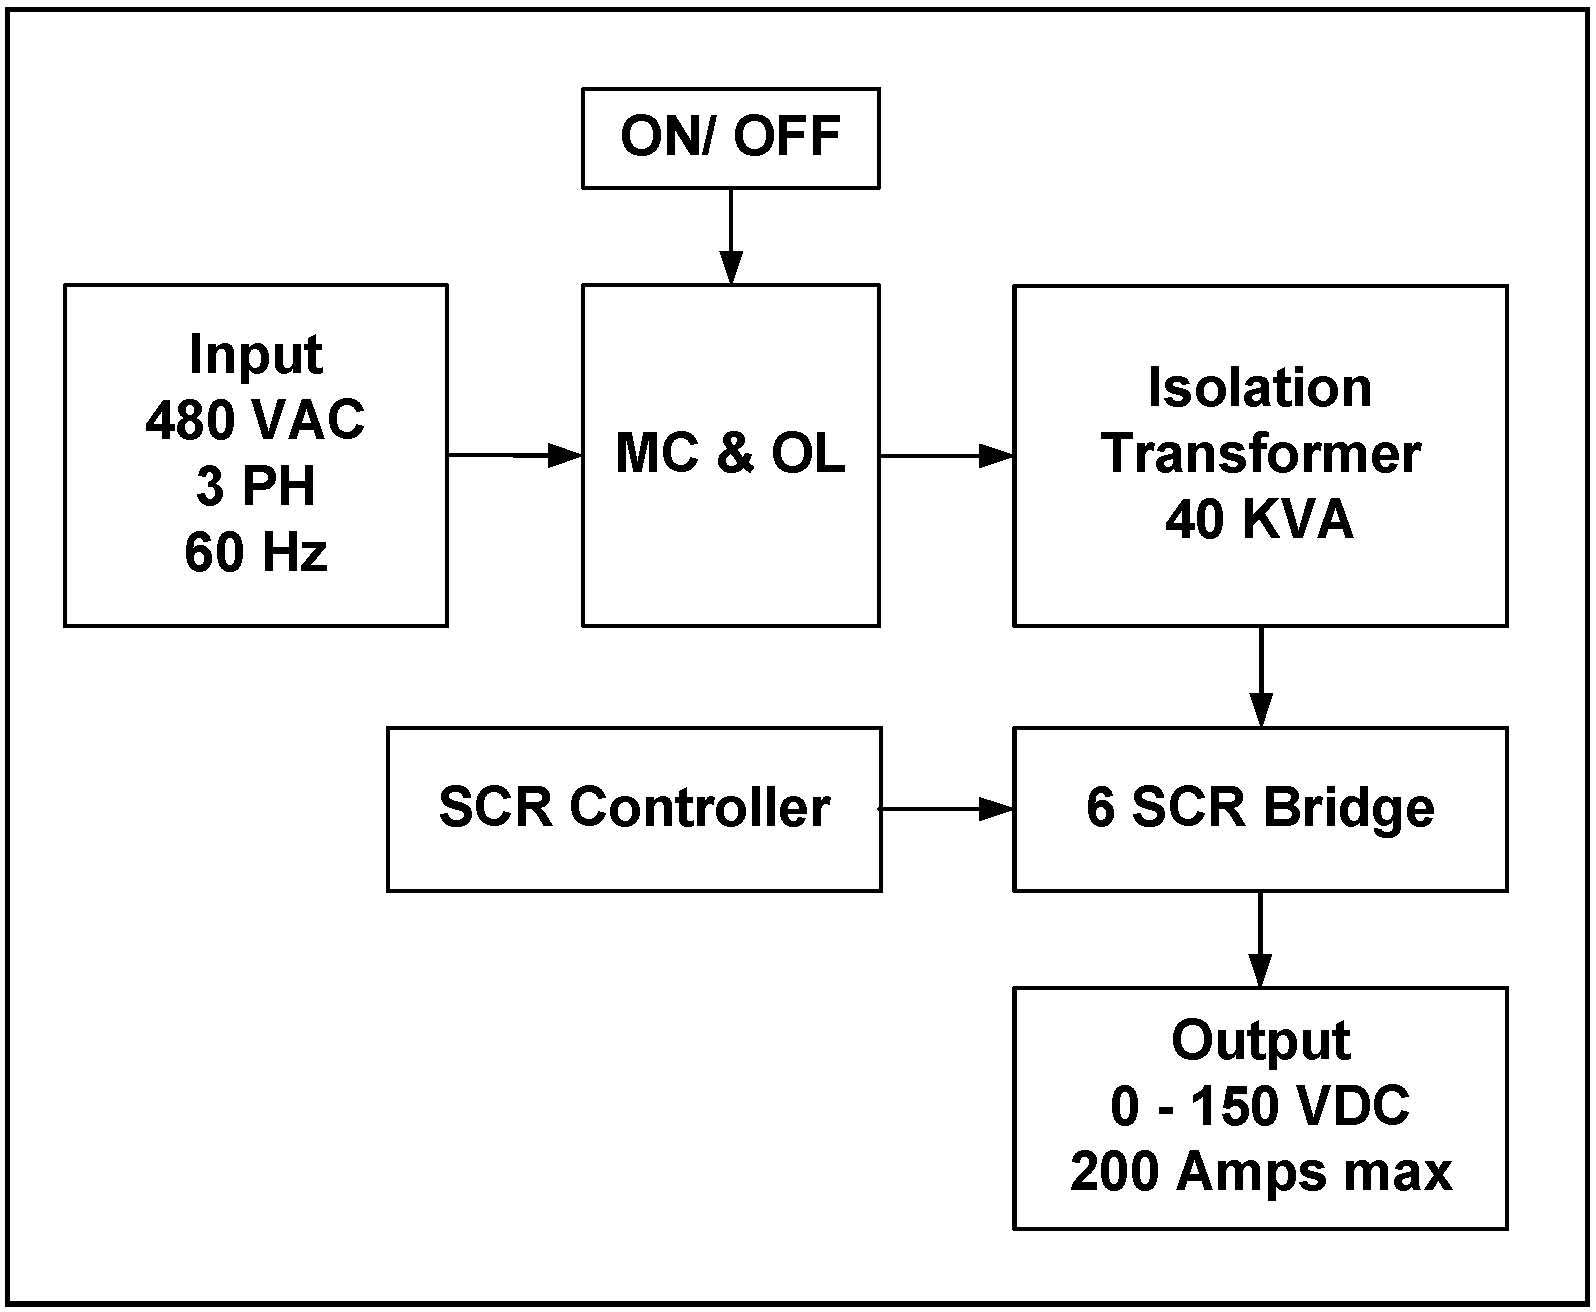 Carl E. Holmes Company (CEHCO): SCR Controlled Variable DC Power Supply